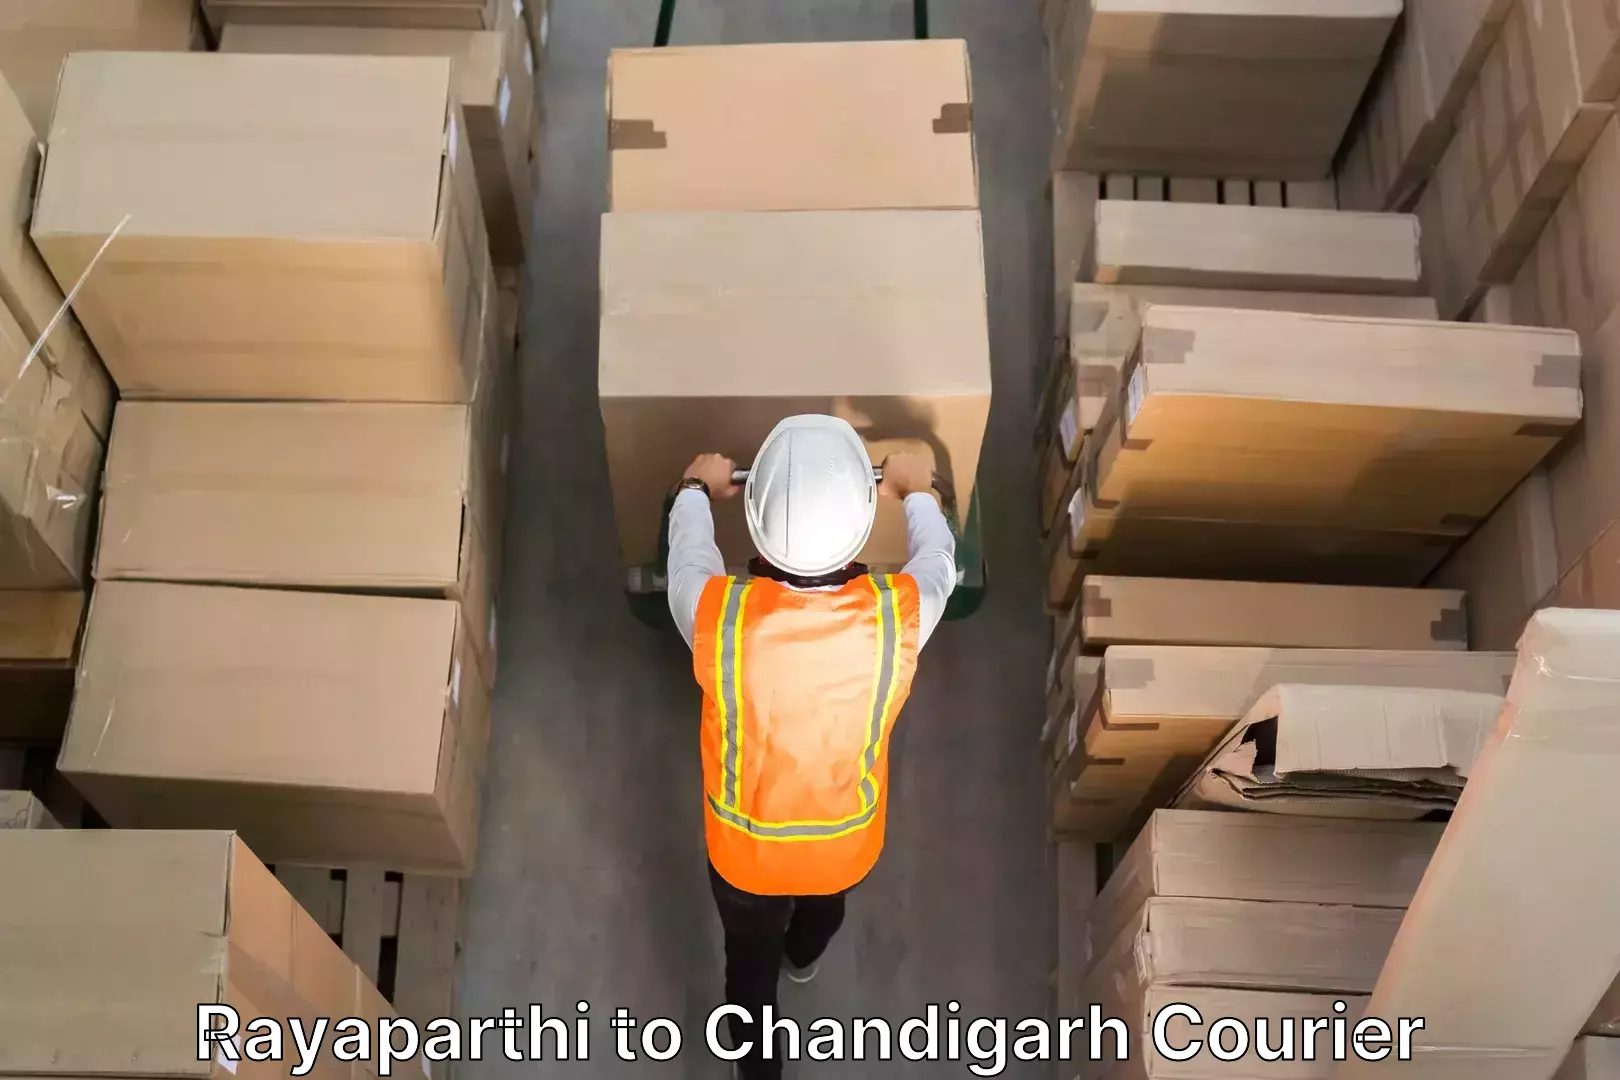 Furniture moving specialists Rayaparthi to Chandigarh